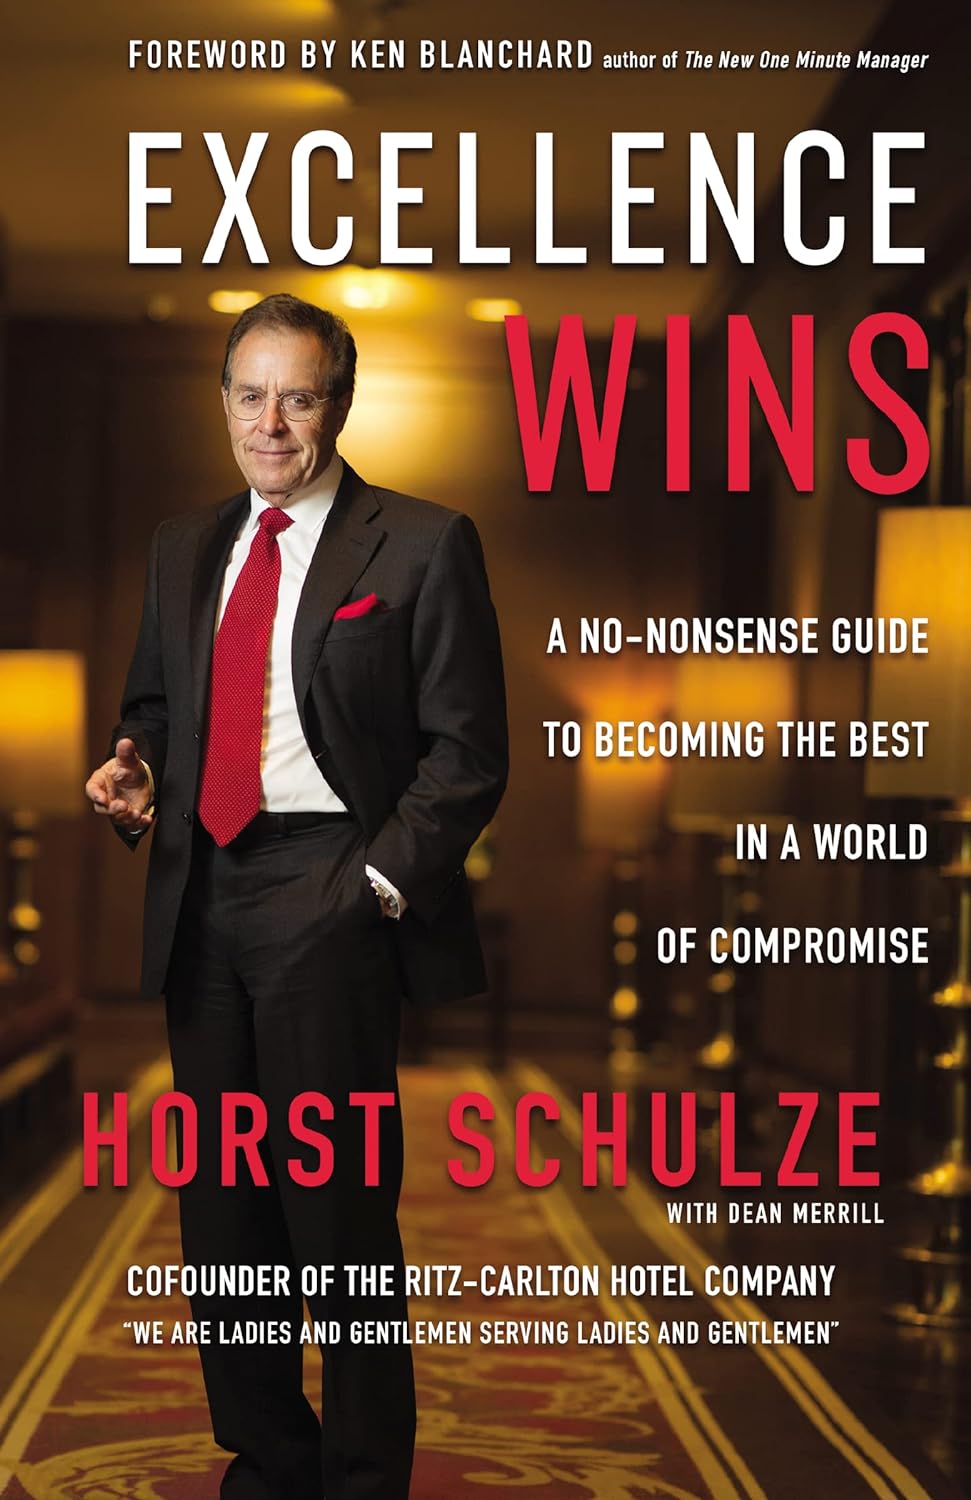 Excellence Wins A No-Nonsense Guide to Becoming the Best in a World of Compromise by Horst Schulze